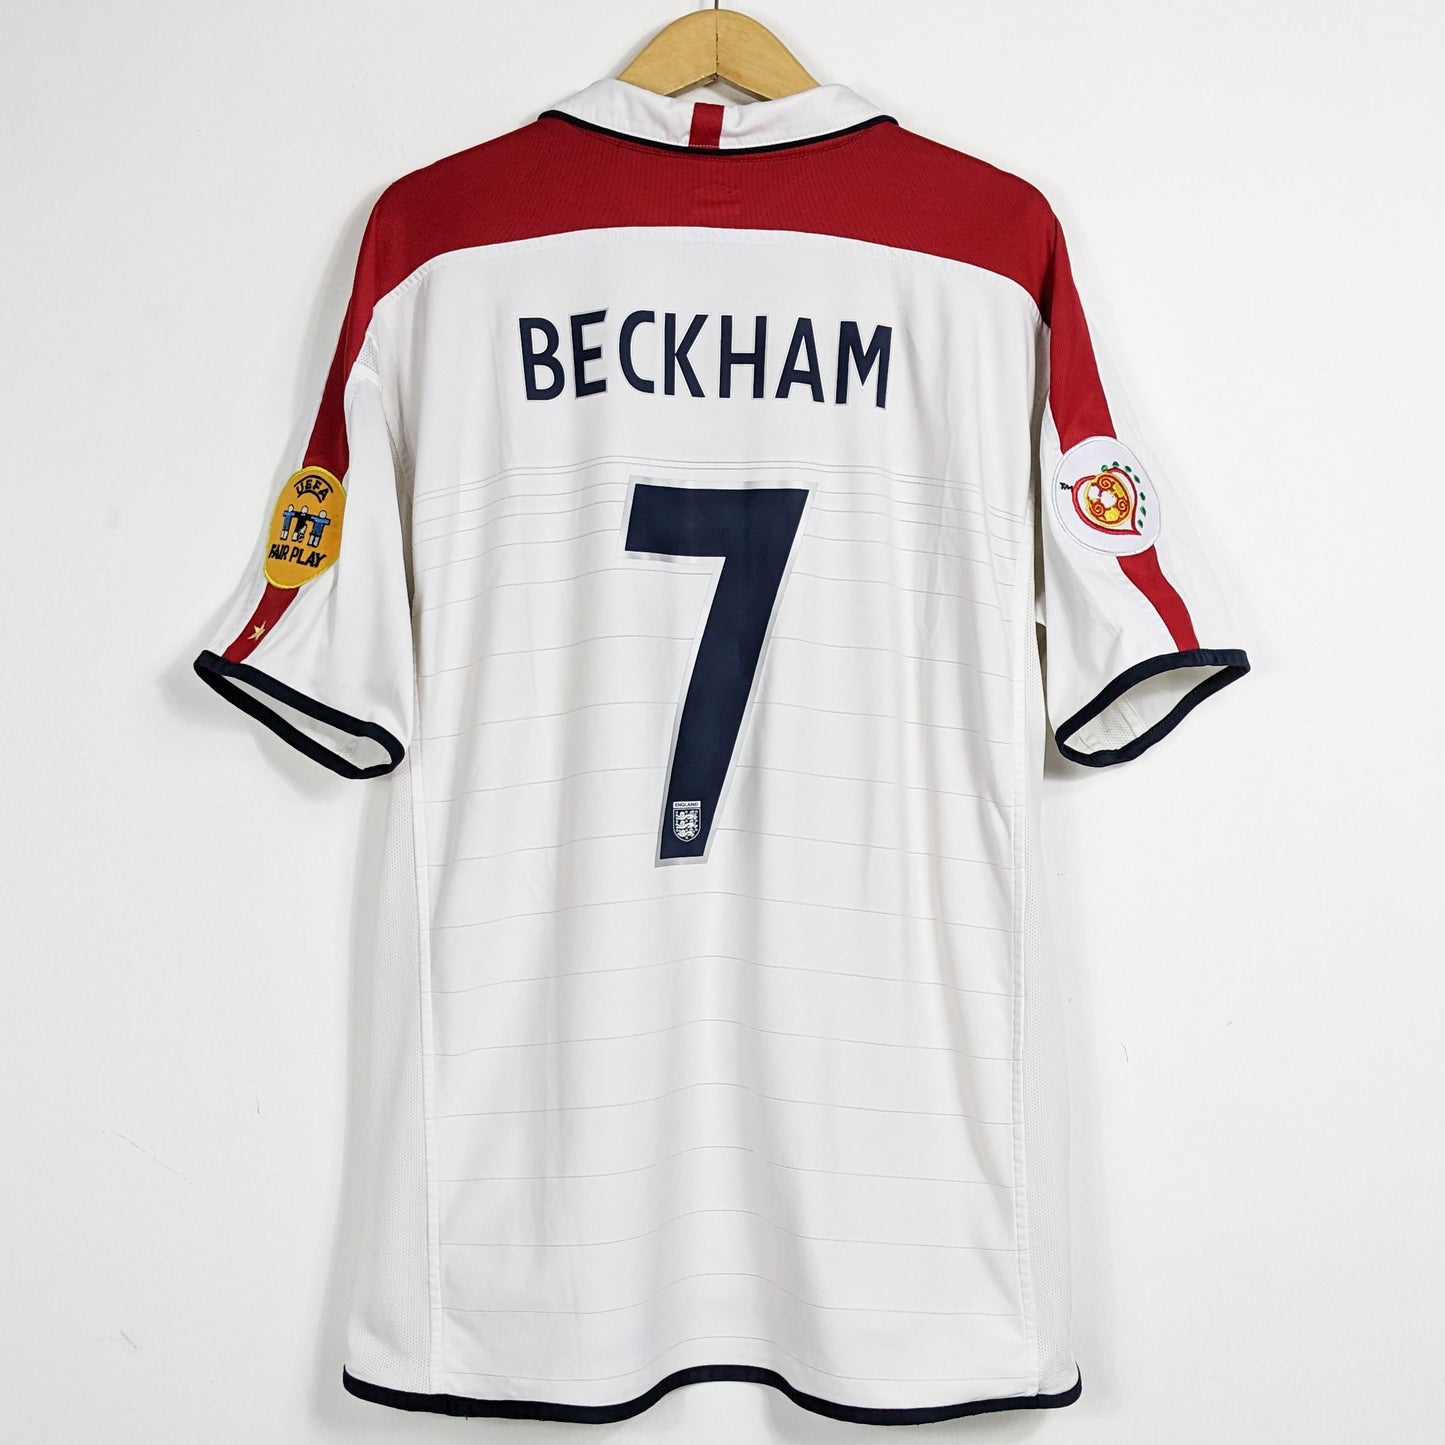 Authentic England 2004 Home - Beckham #7 Size XL (With shorts) (Euro)